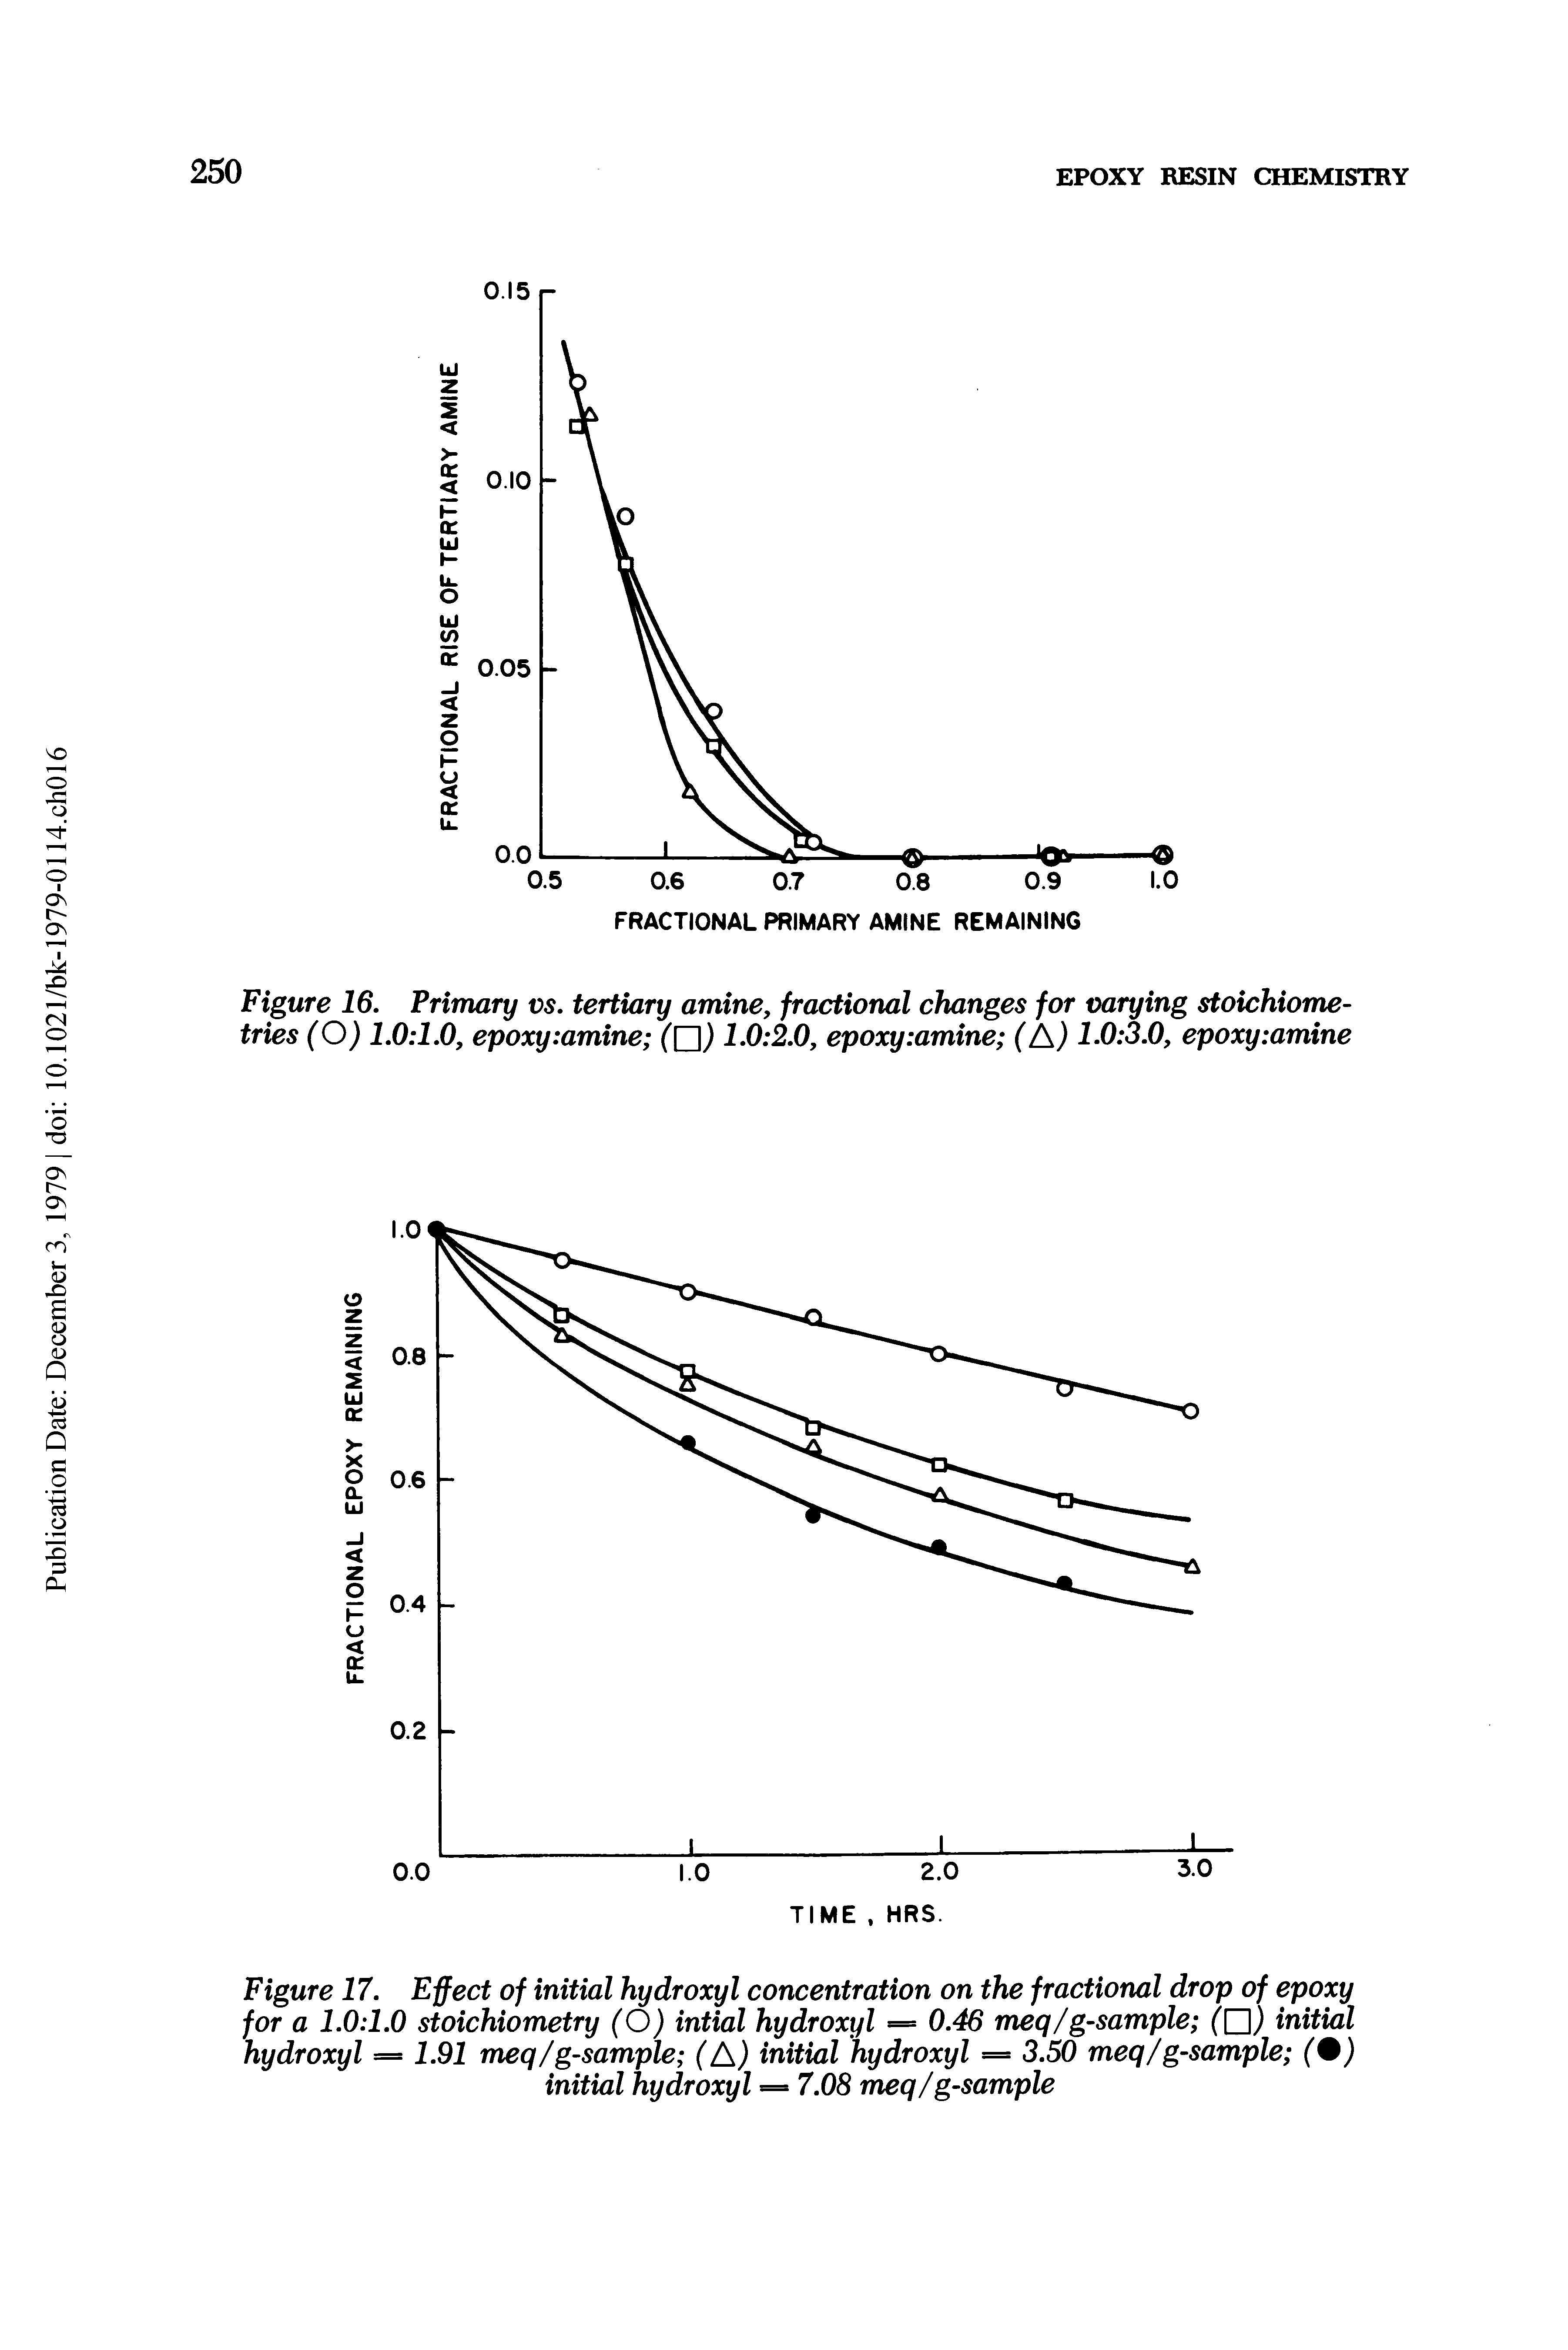 Figure 16. Primary vs. tertiary amine, fractional changes for varying stoichiometries (O) 1.0 1.0, epoxy amine 1.0 2.0, epoxy amine 1.0 3.0, epoxy amine...